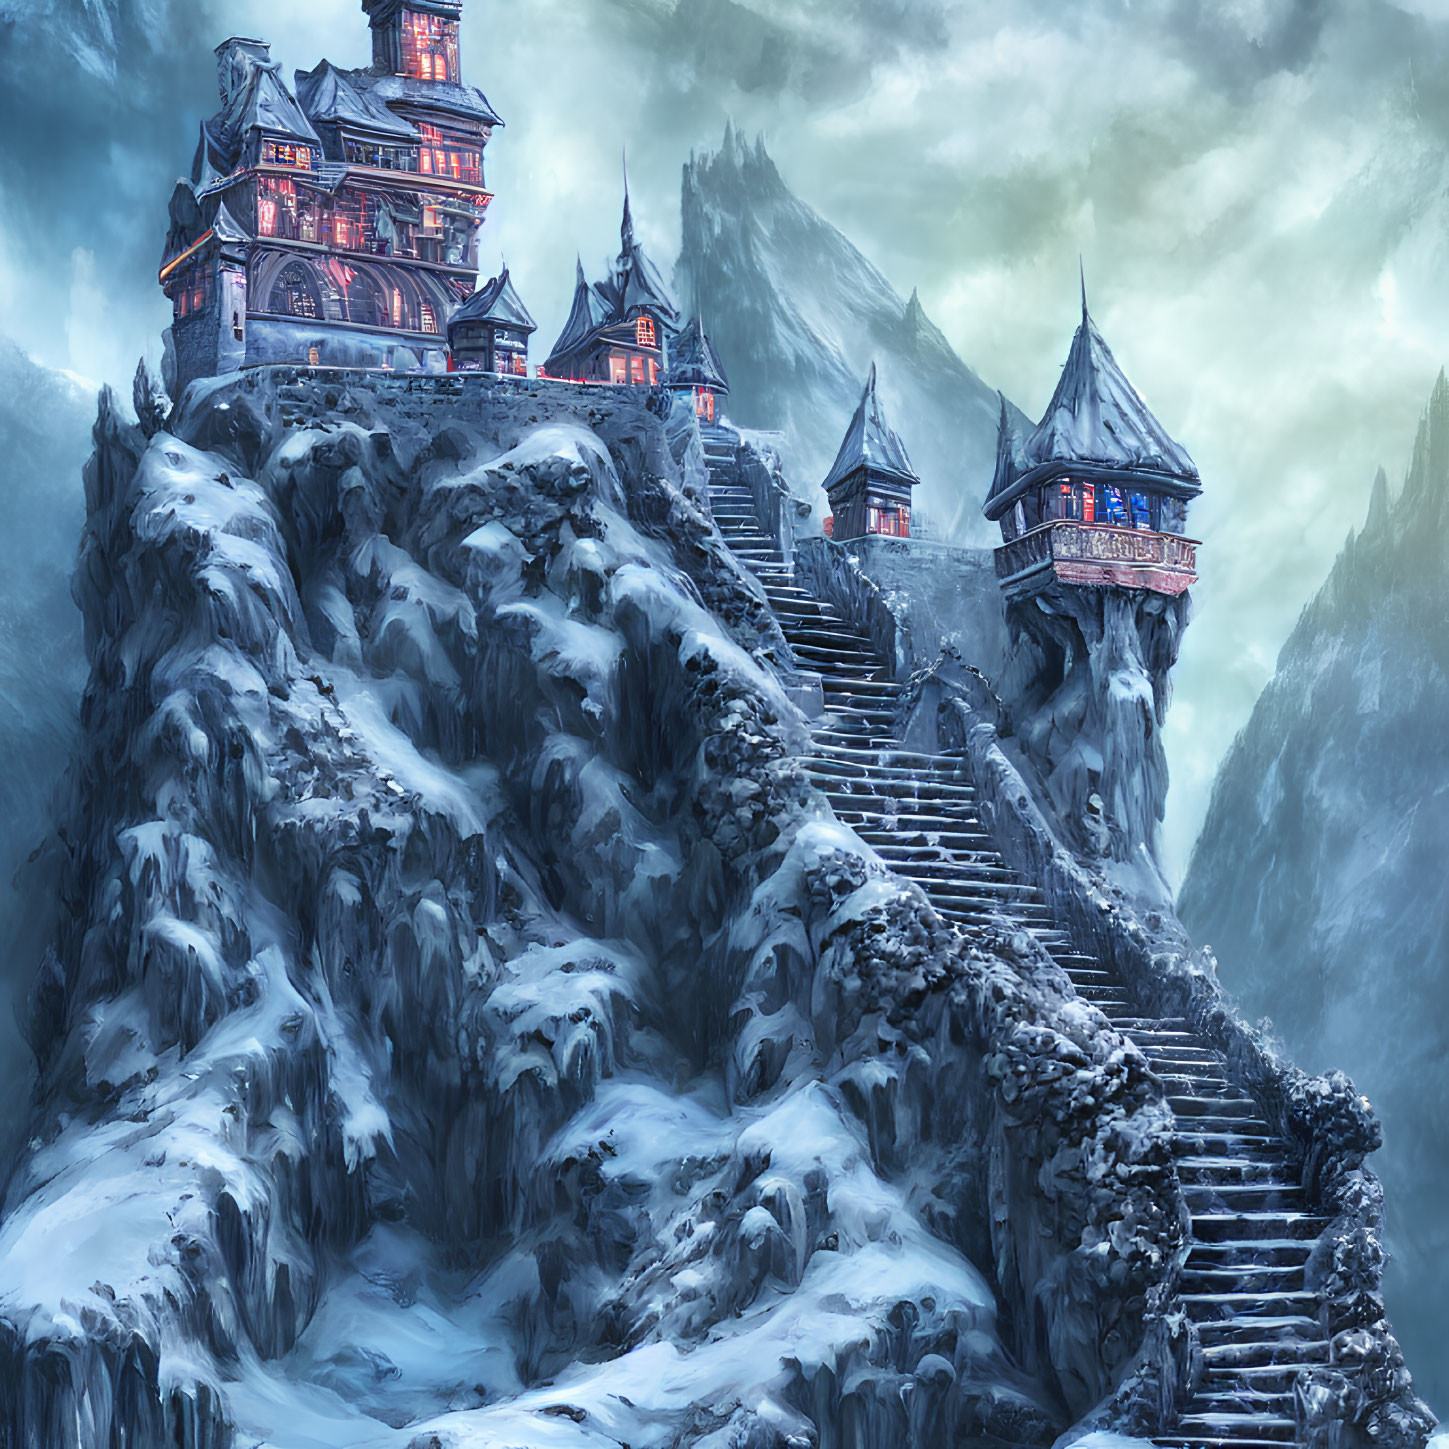 Fantasy castle on snow-covered mountain peak under cloudy sky